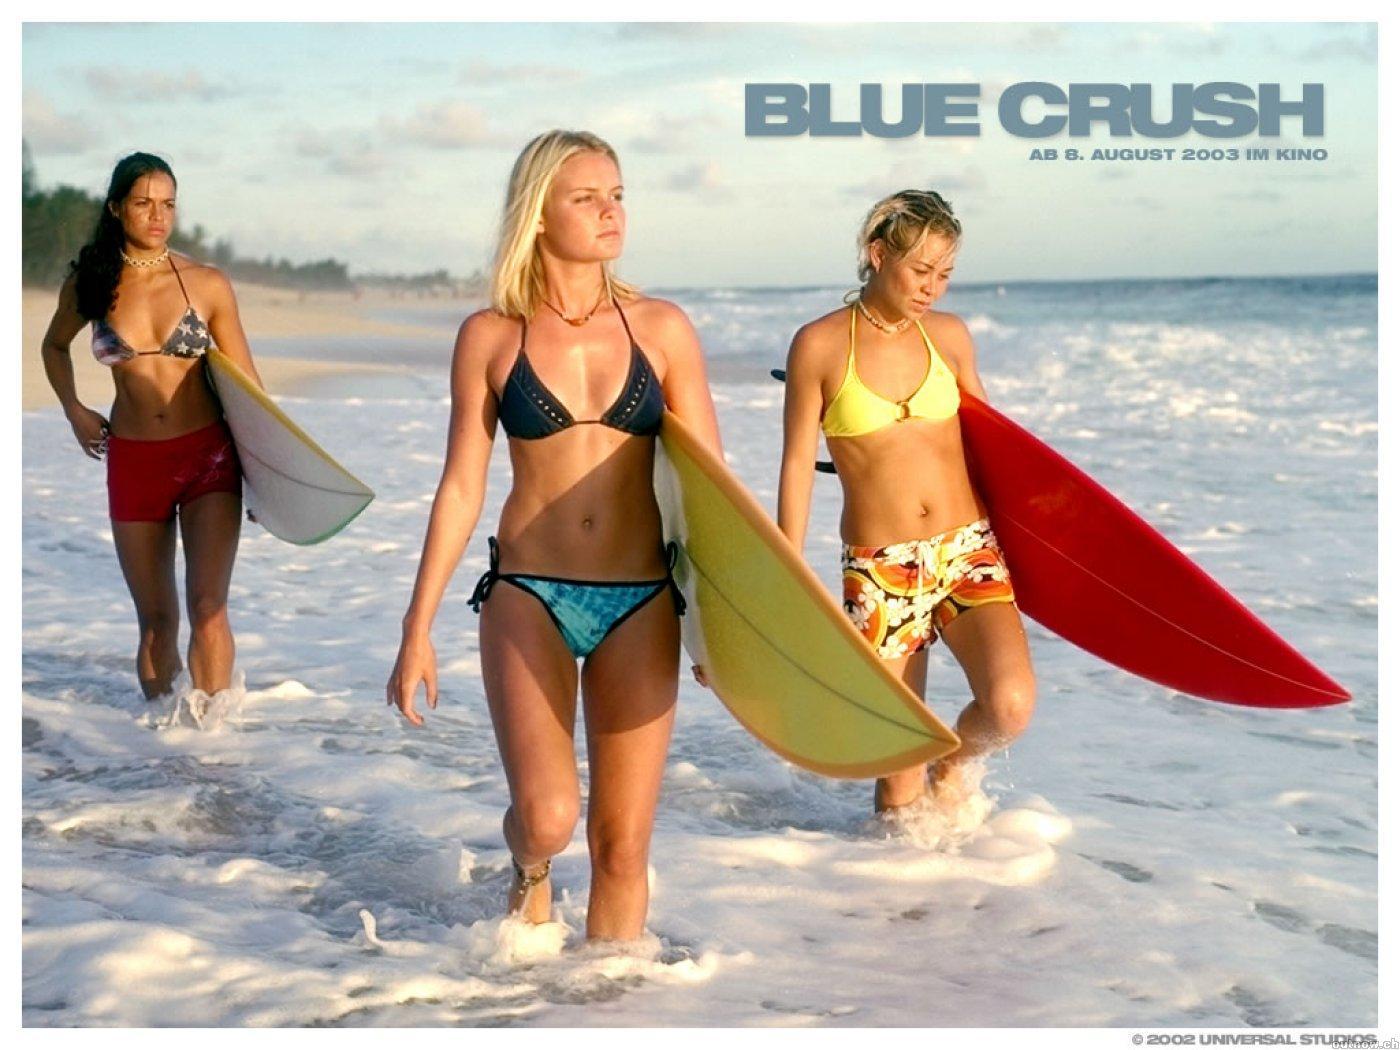 10 Celebrities Who Have Rocked Blue Crush Penny Hair - wide 10